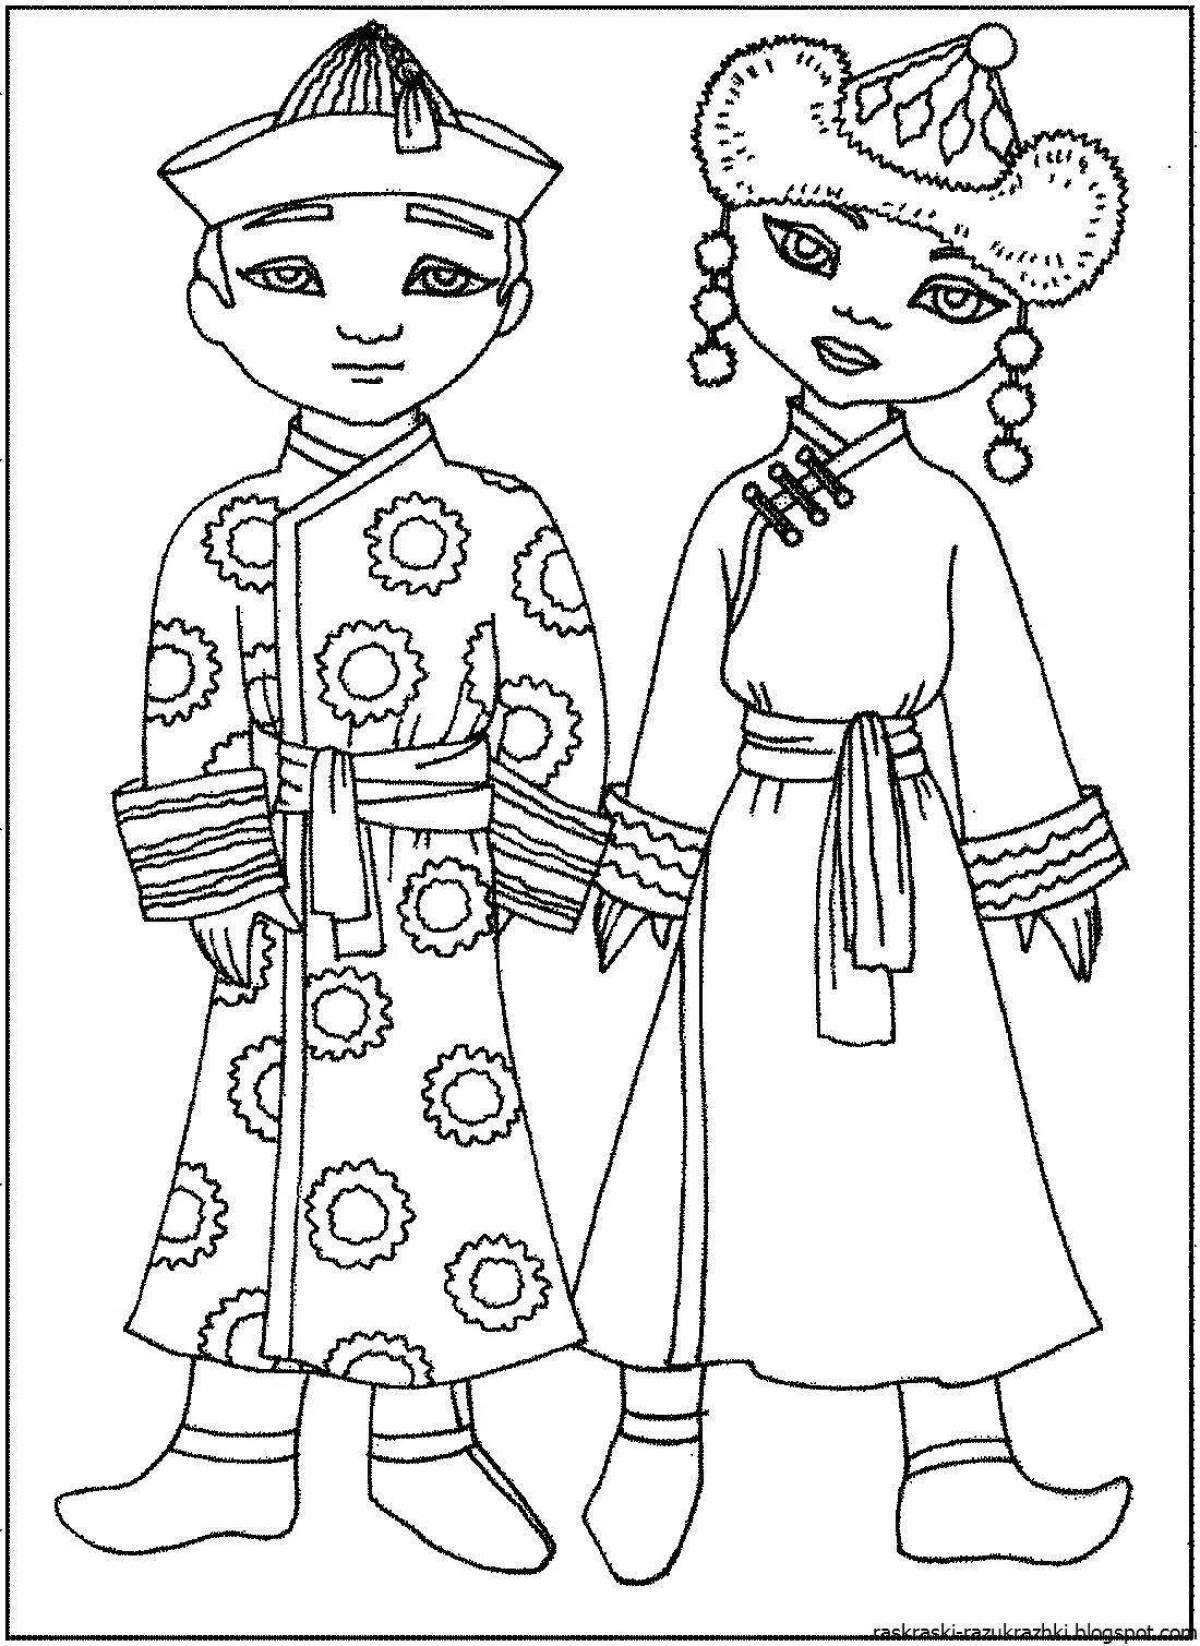 Coloring page charming Tatar folk costume